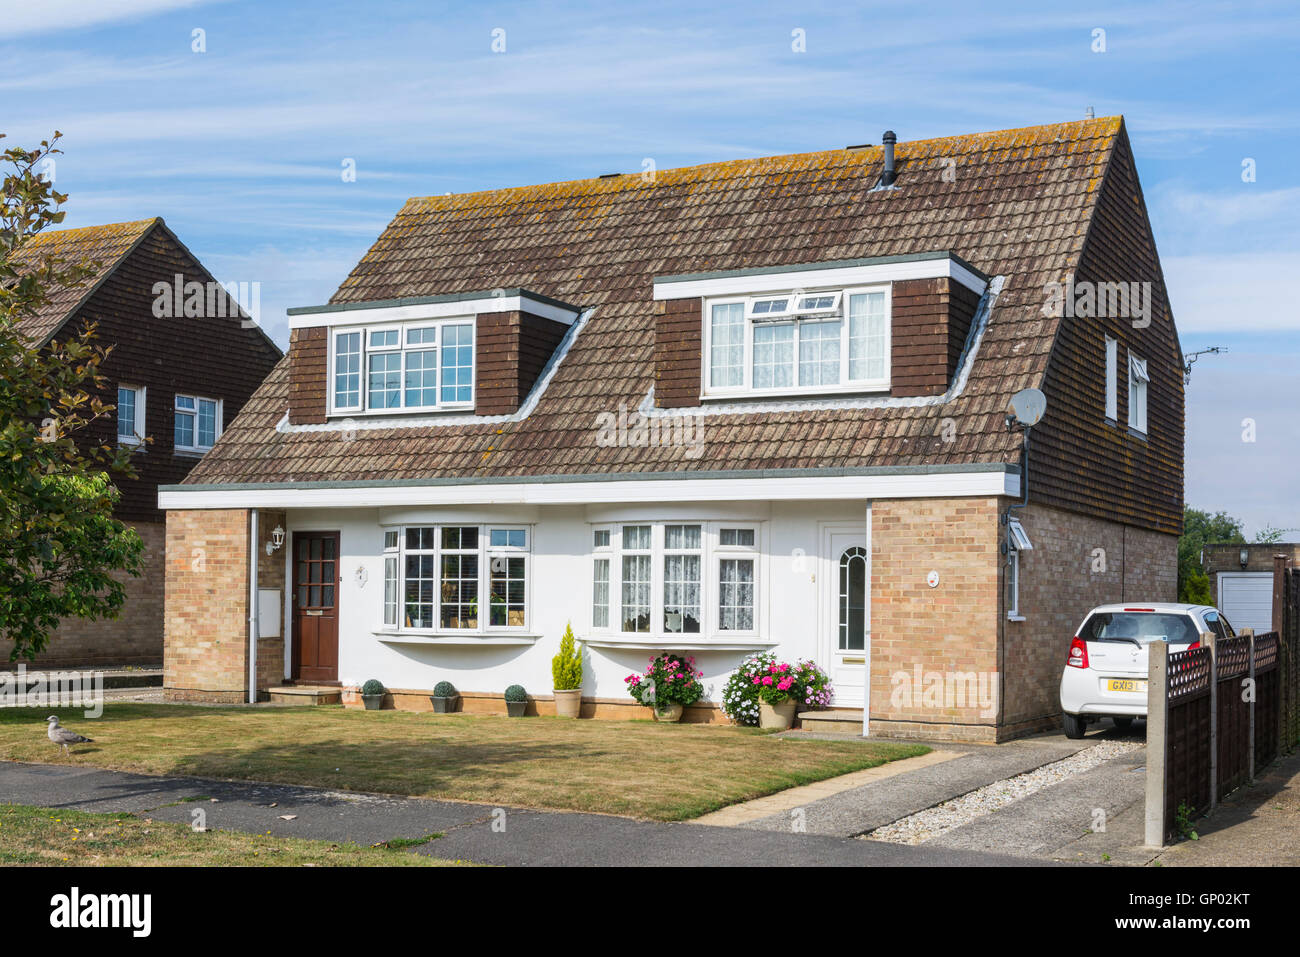 Dormer Windows on a semi detached house in England, UK. Stock Photo